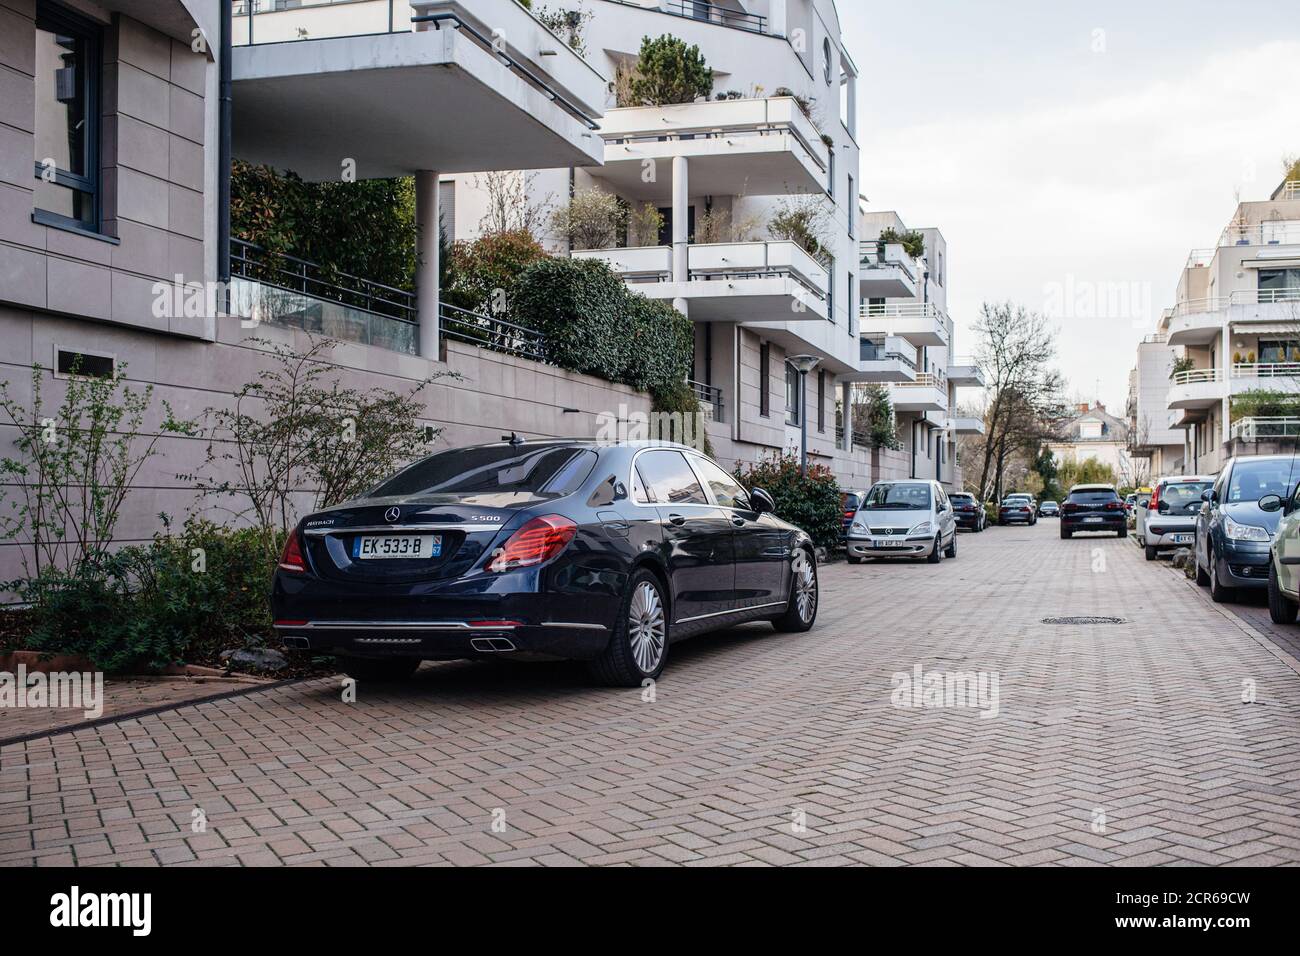 Strasbourg, France - Apr 8, 2018: Rear view of new luxury Mercedes-Benz Maybach S500 limousine parked on a large street with multiple apartment buildings perspective view Stock Photo